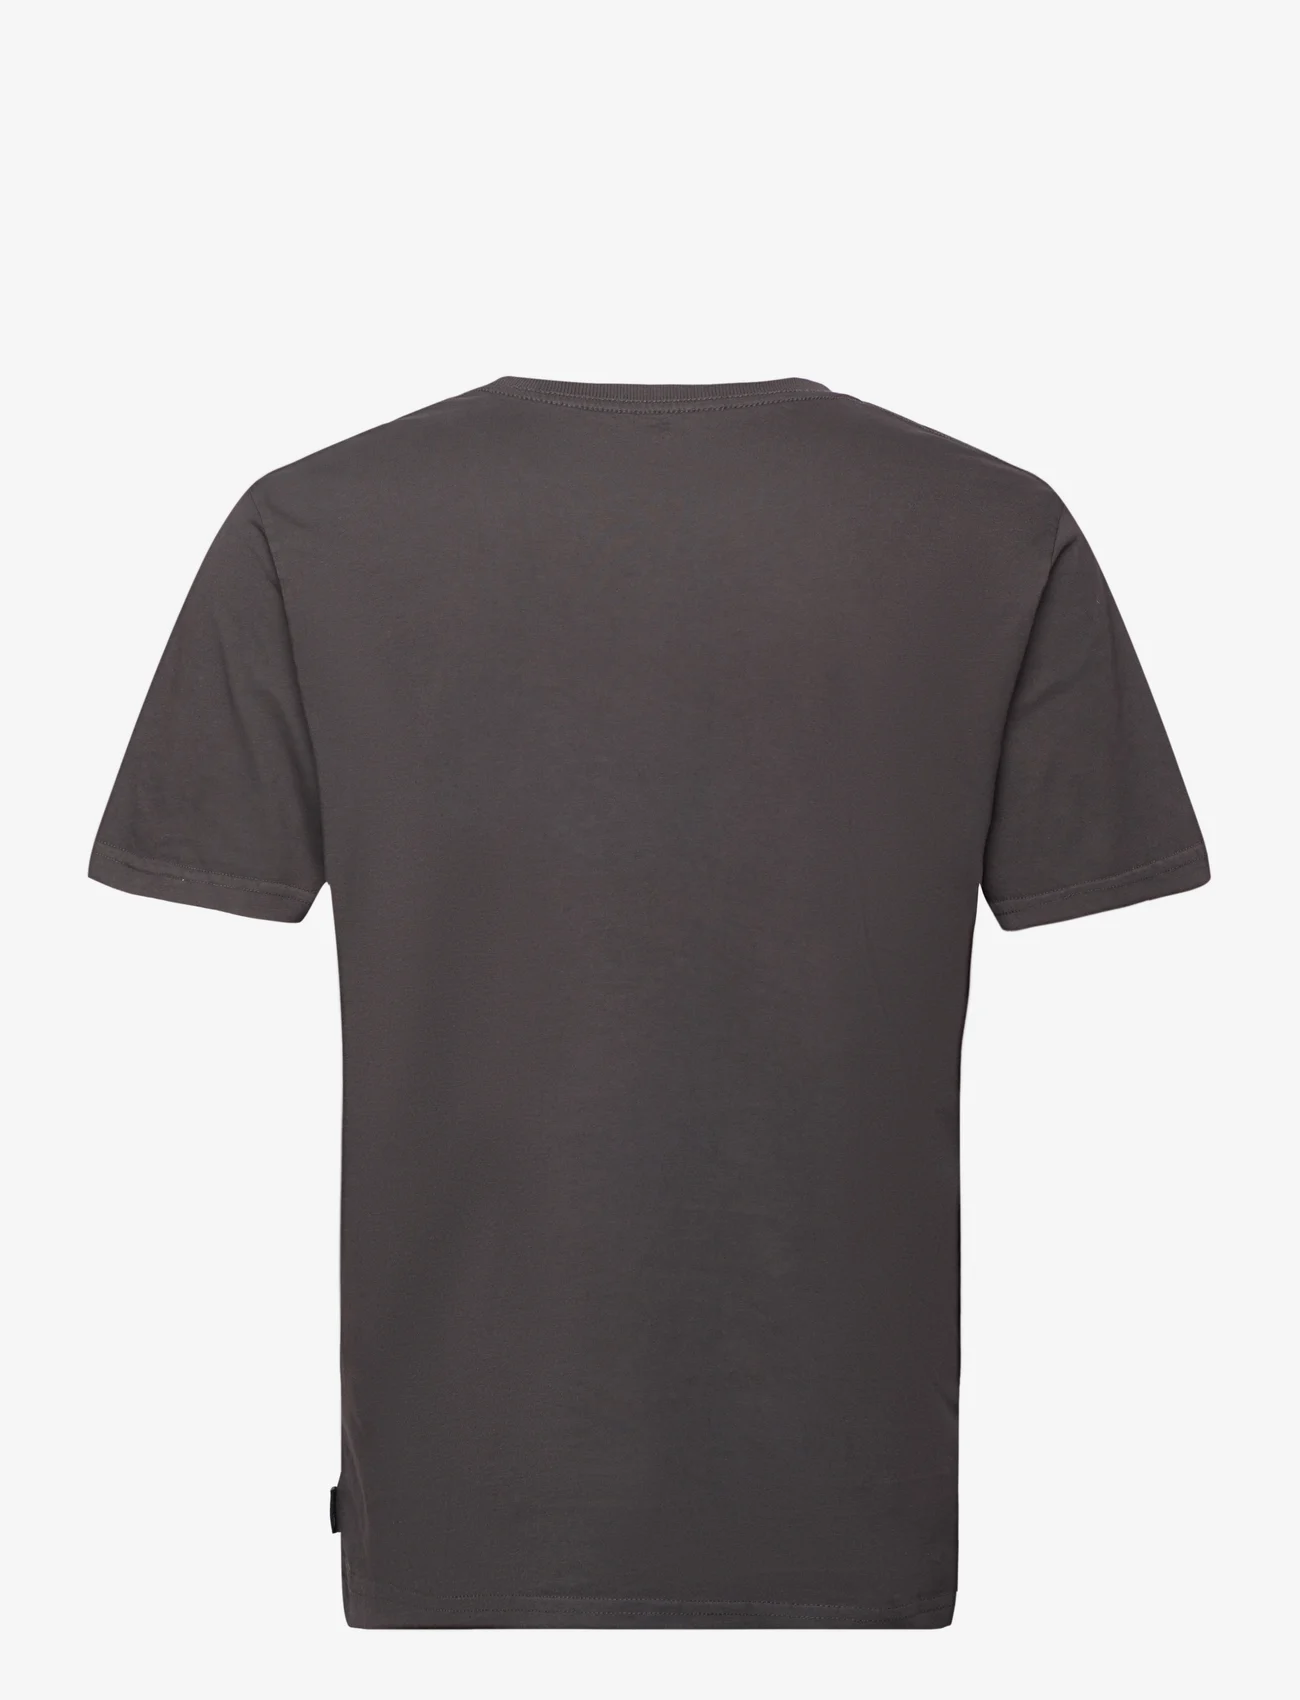 Rip Curl - SURF REVIVAL MUMMA TEE - lowest prices - washed black - 1